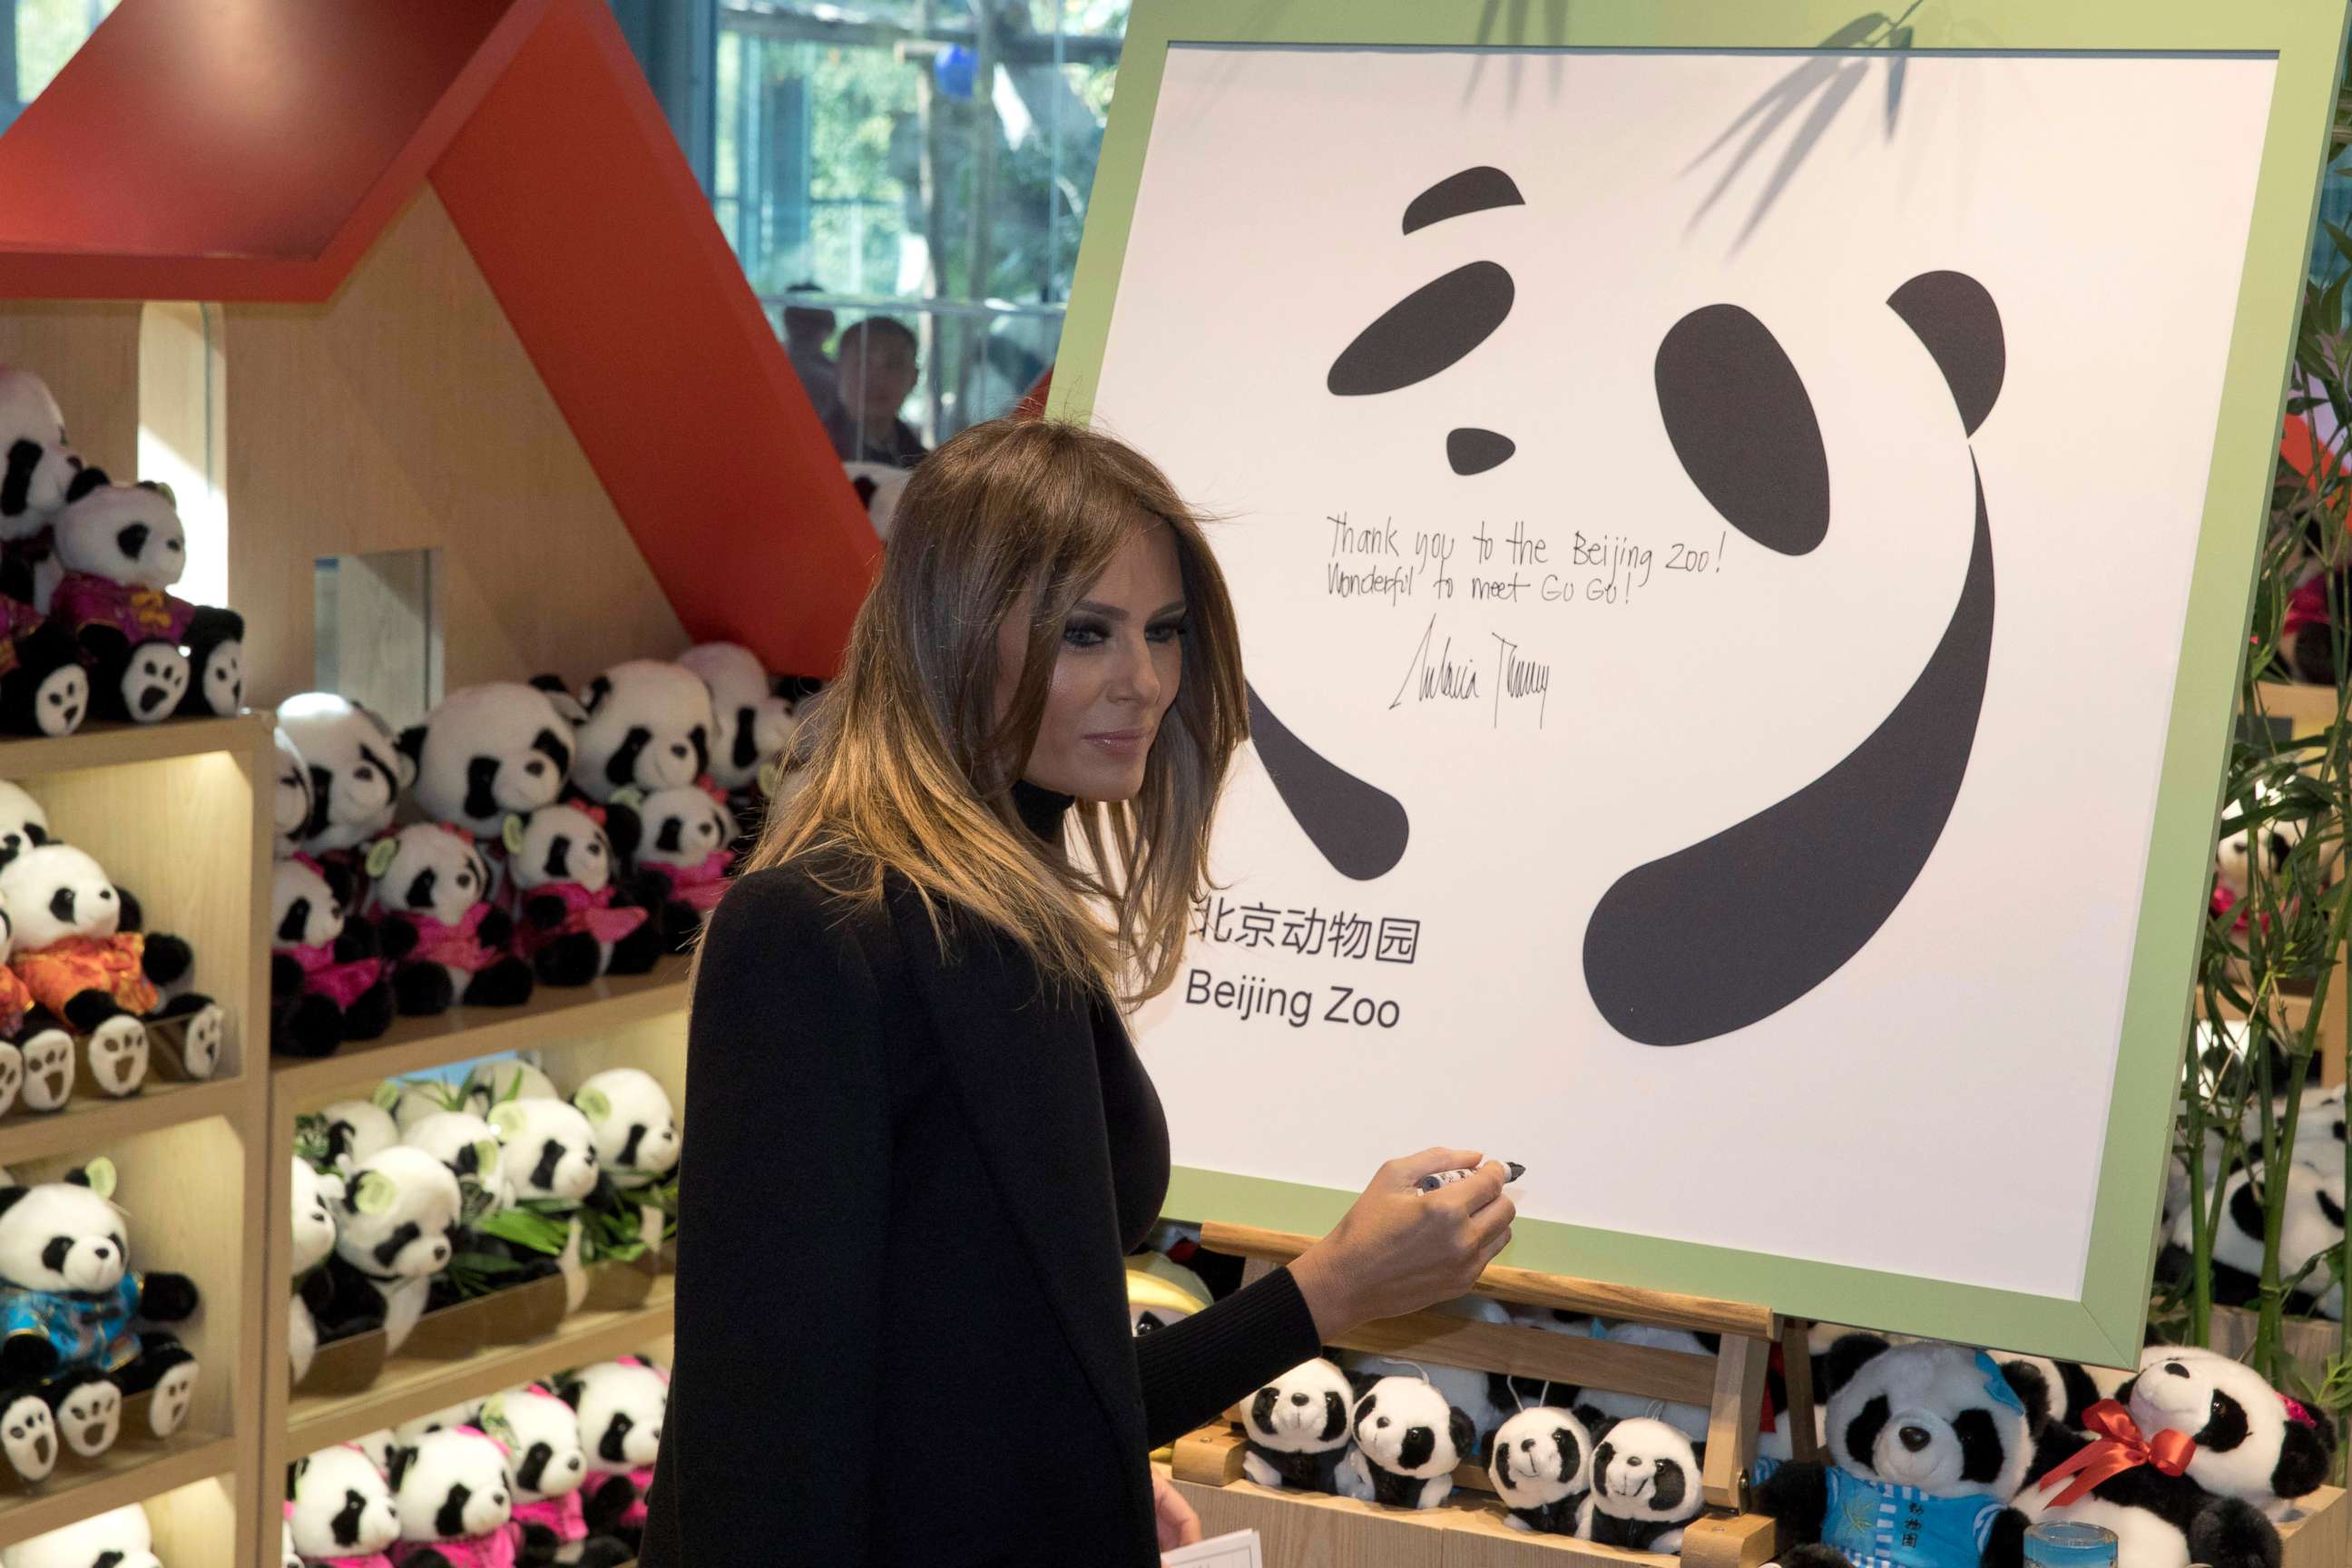 PHOTO: U.S. first lady Melania Trump leaves well-wishes on a board after visiting the Panda enclosure at the zoo in Beijing Friday, Nov. 10, 2017.